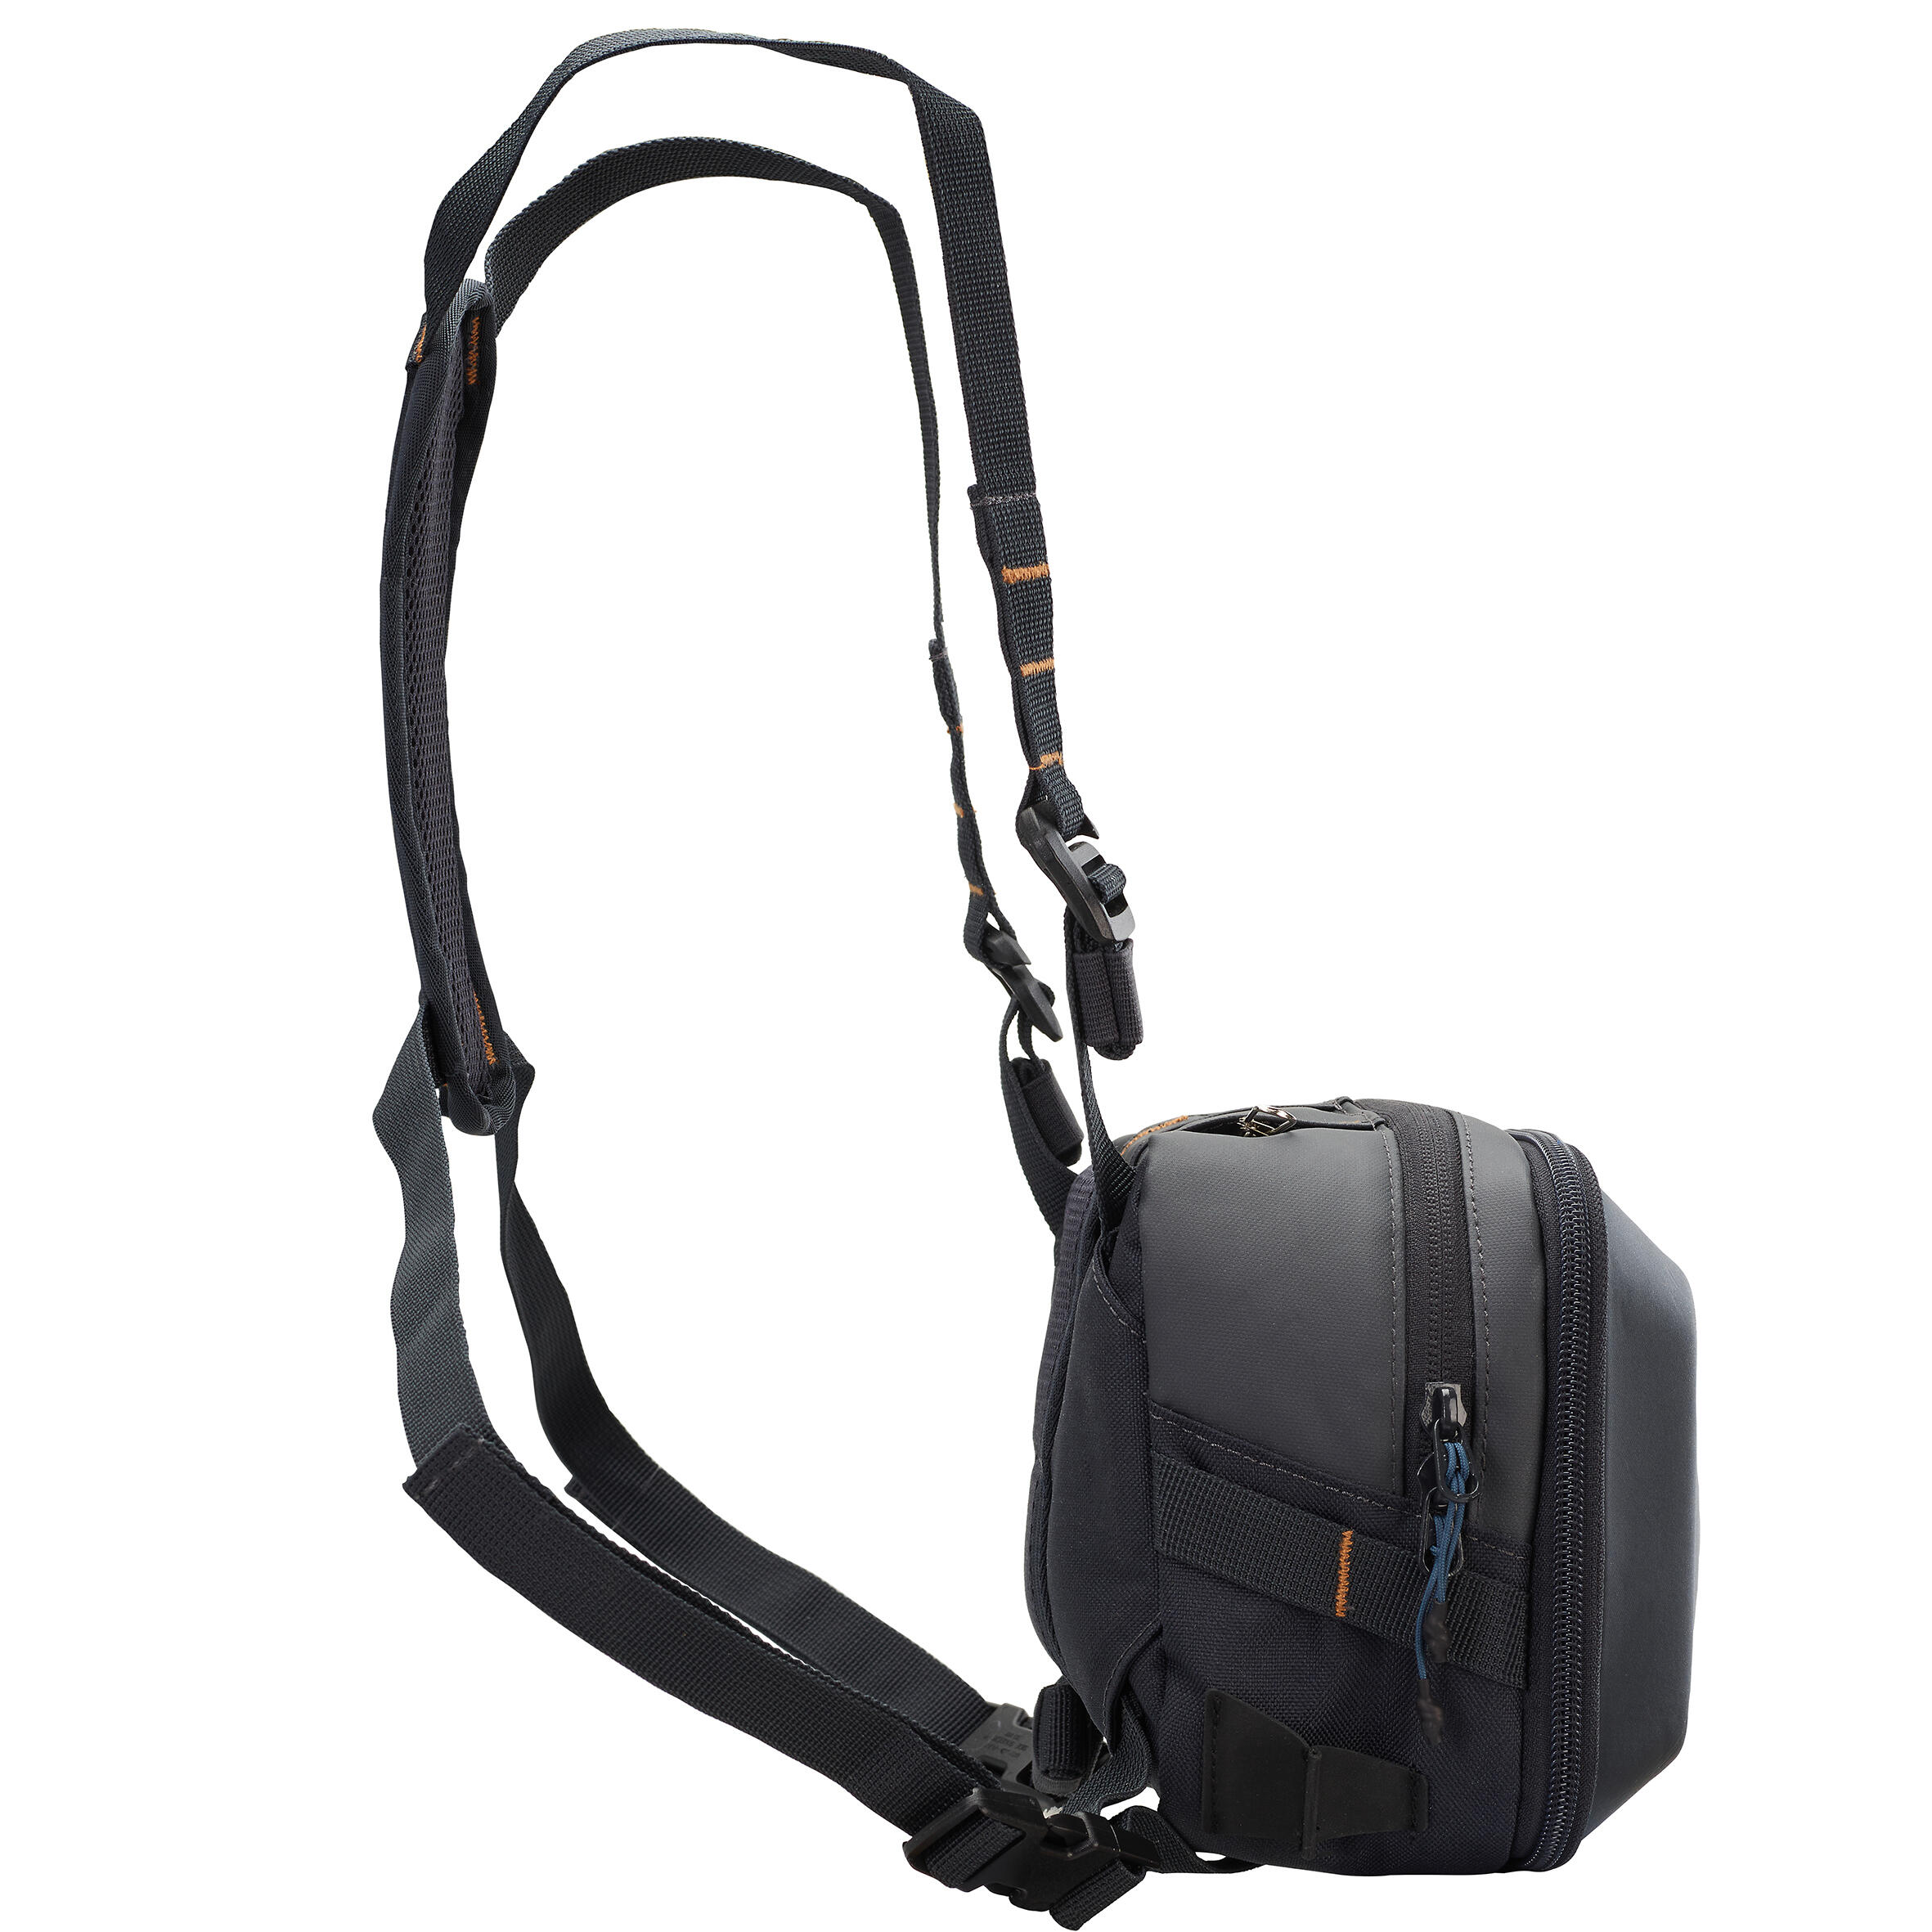  Raprance Fly Fishing Chest Bag Waist Packs for Outdoor  Activities(Black) : Sports & Outdoors